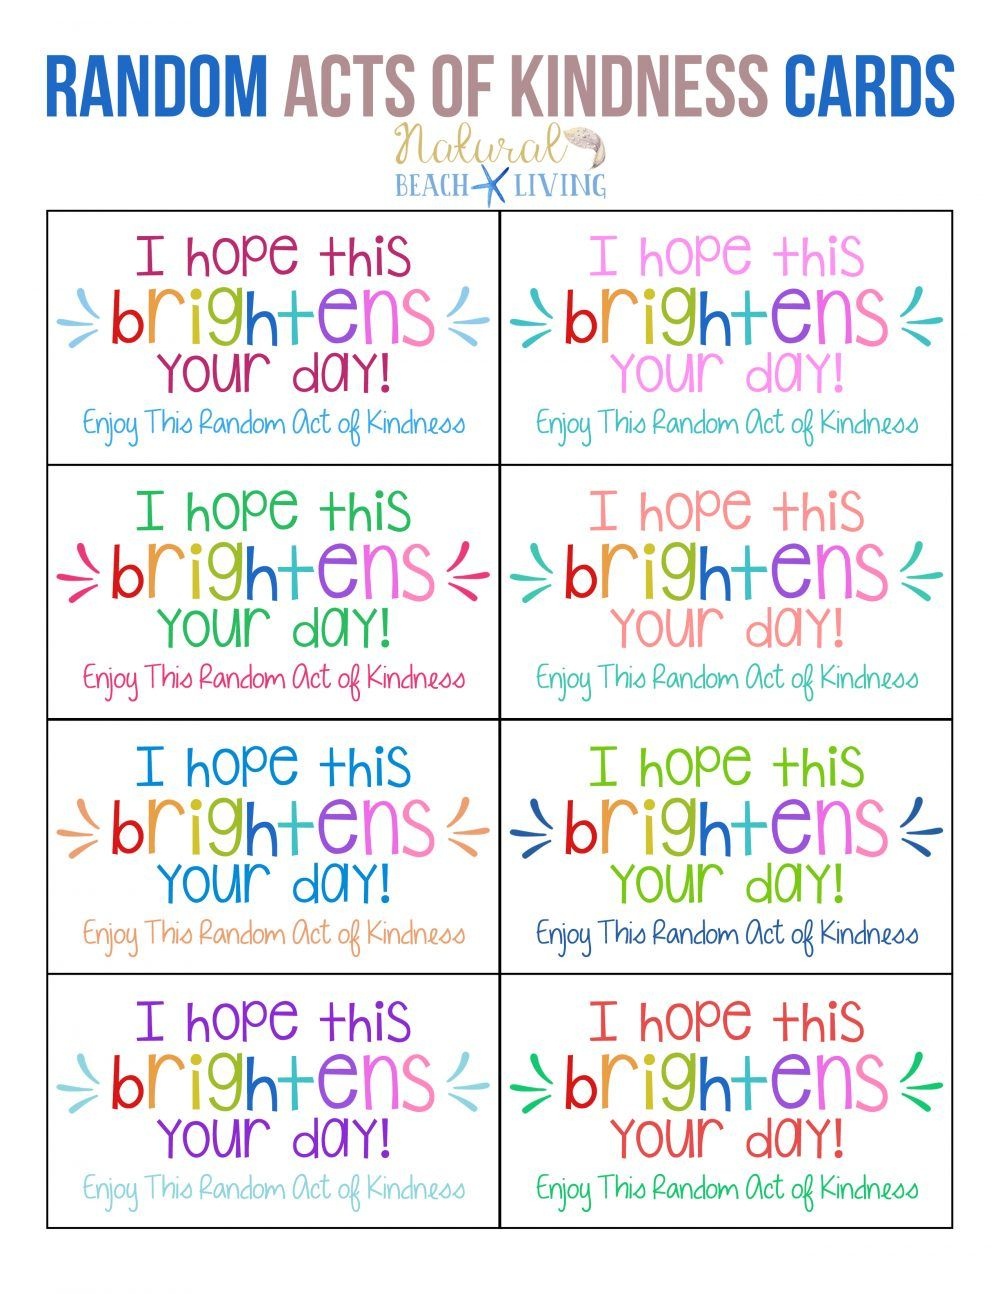 The Best Random Acts Of Kindness Printable Cards Free | Girl Scouts - Kindness Cards Printable Free